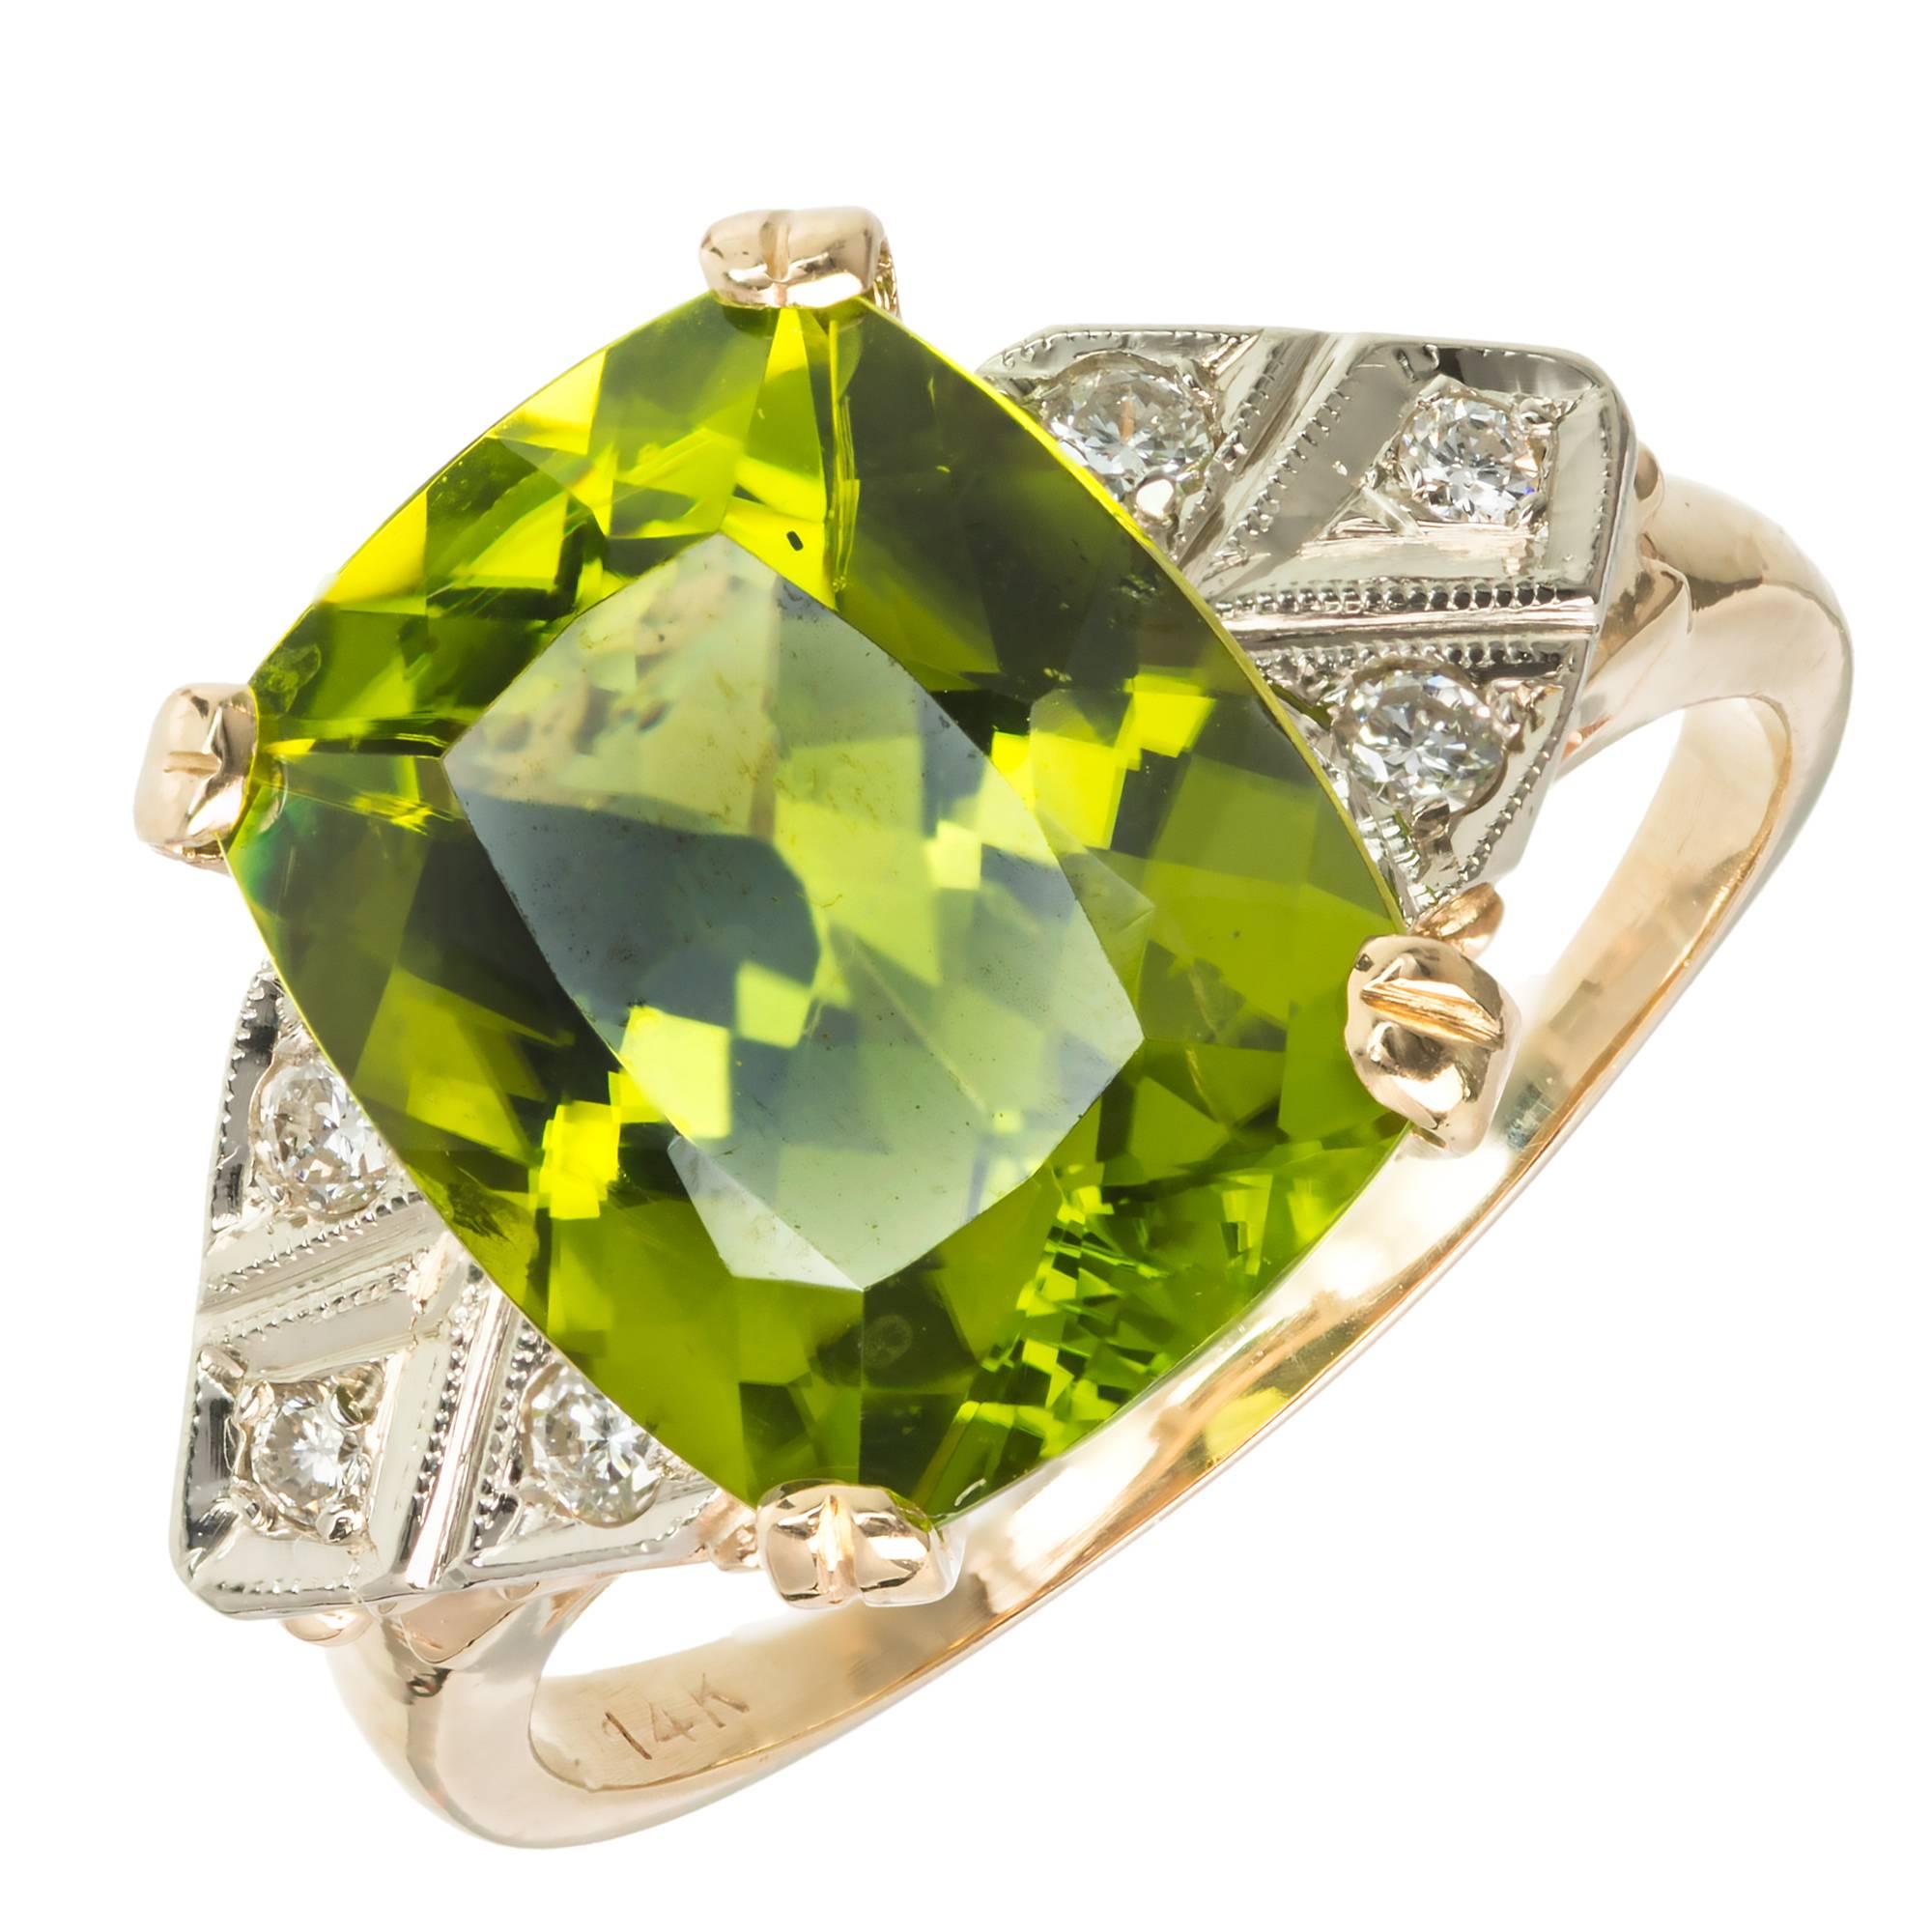 1940 14k yellow gold ring with a bright green Peridot and full cut Diamond accents in 14k white gold.

1 cushion green Peridot, approx. total weight 6.50cts, SI1
6 round full cut Diamonds, approx. total weight .16cts, H, SI1
14k white gold
Tested